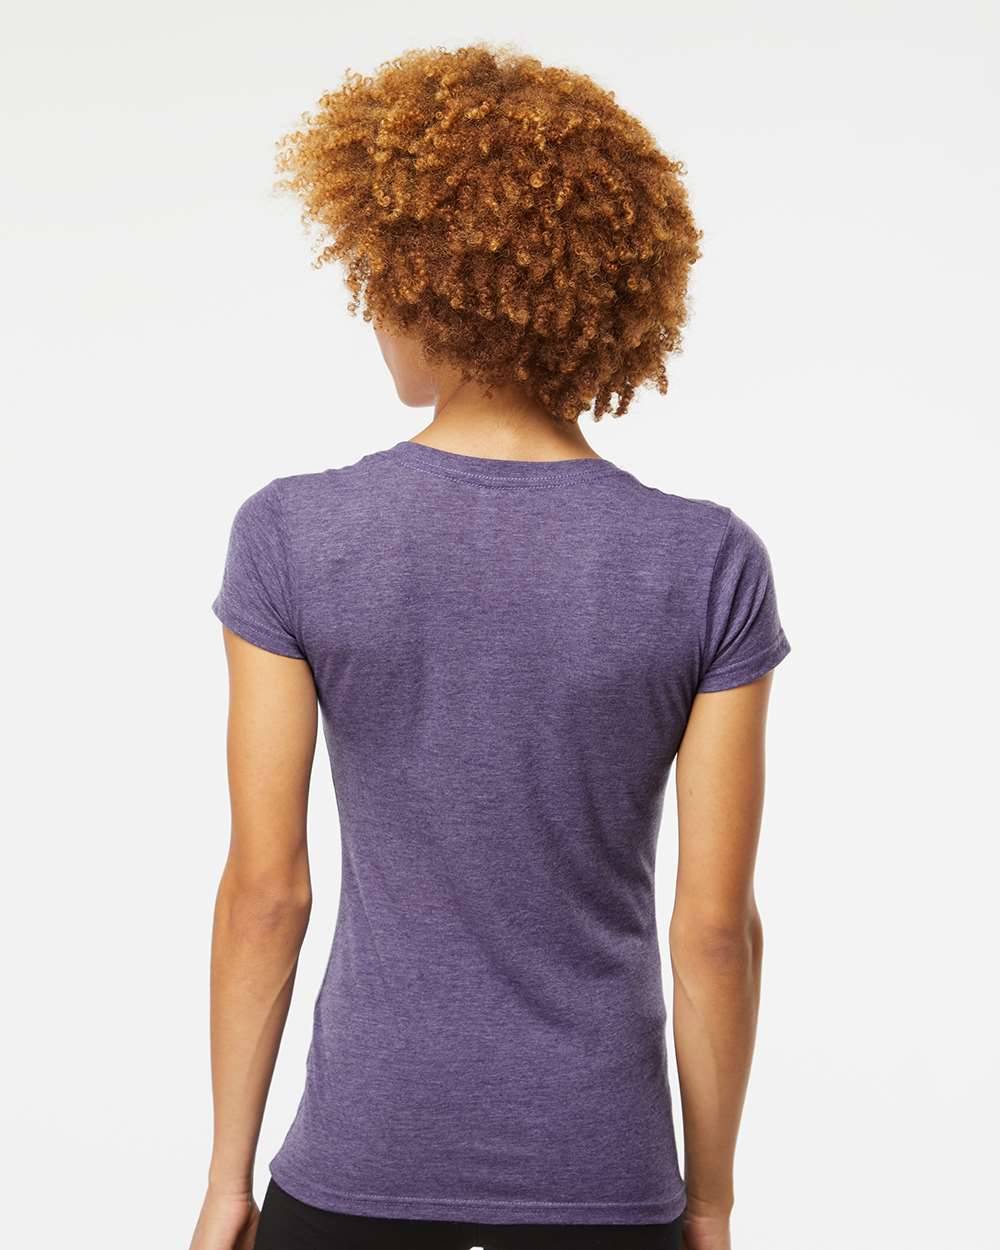 M&O Women's Deluxe Blend V-Neck T-Shirt 3542 #colormdl_Heather Purple